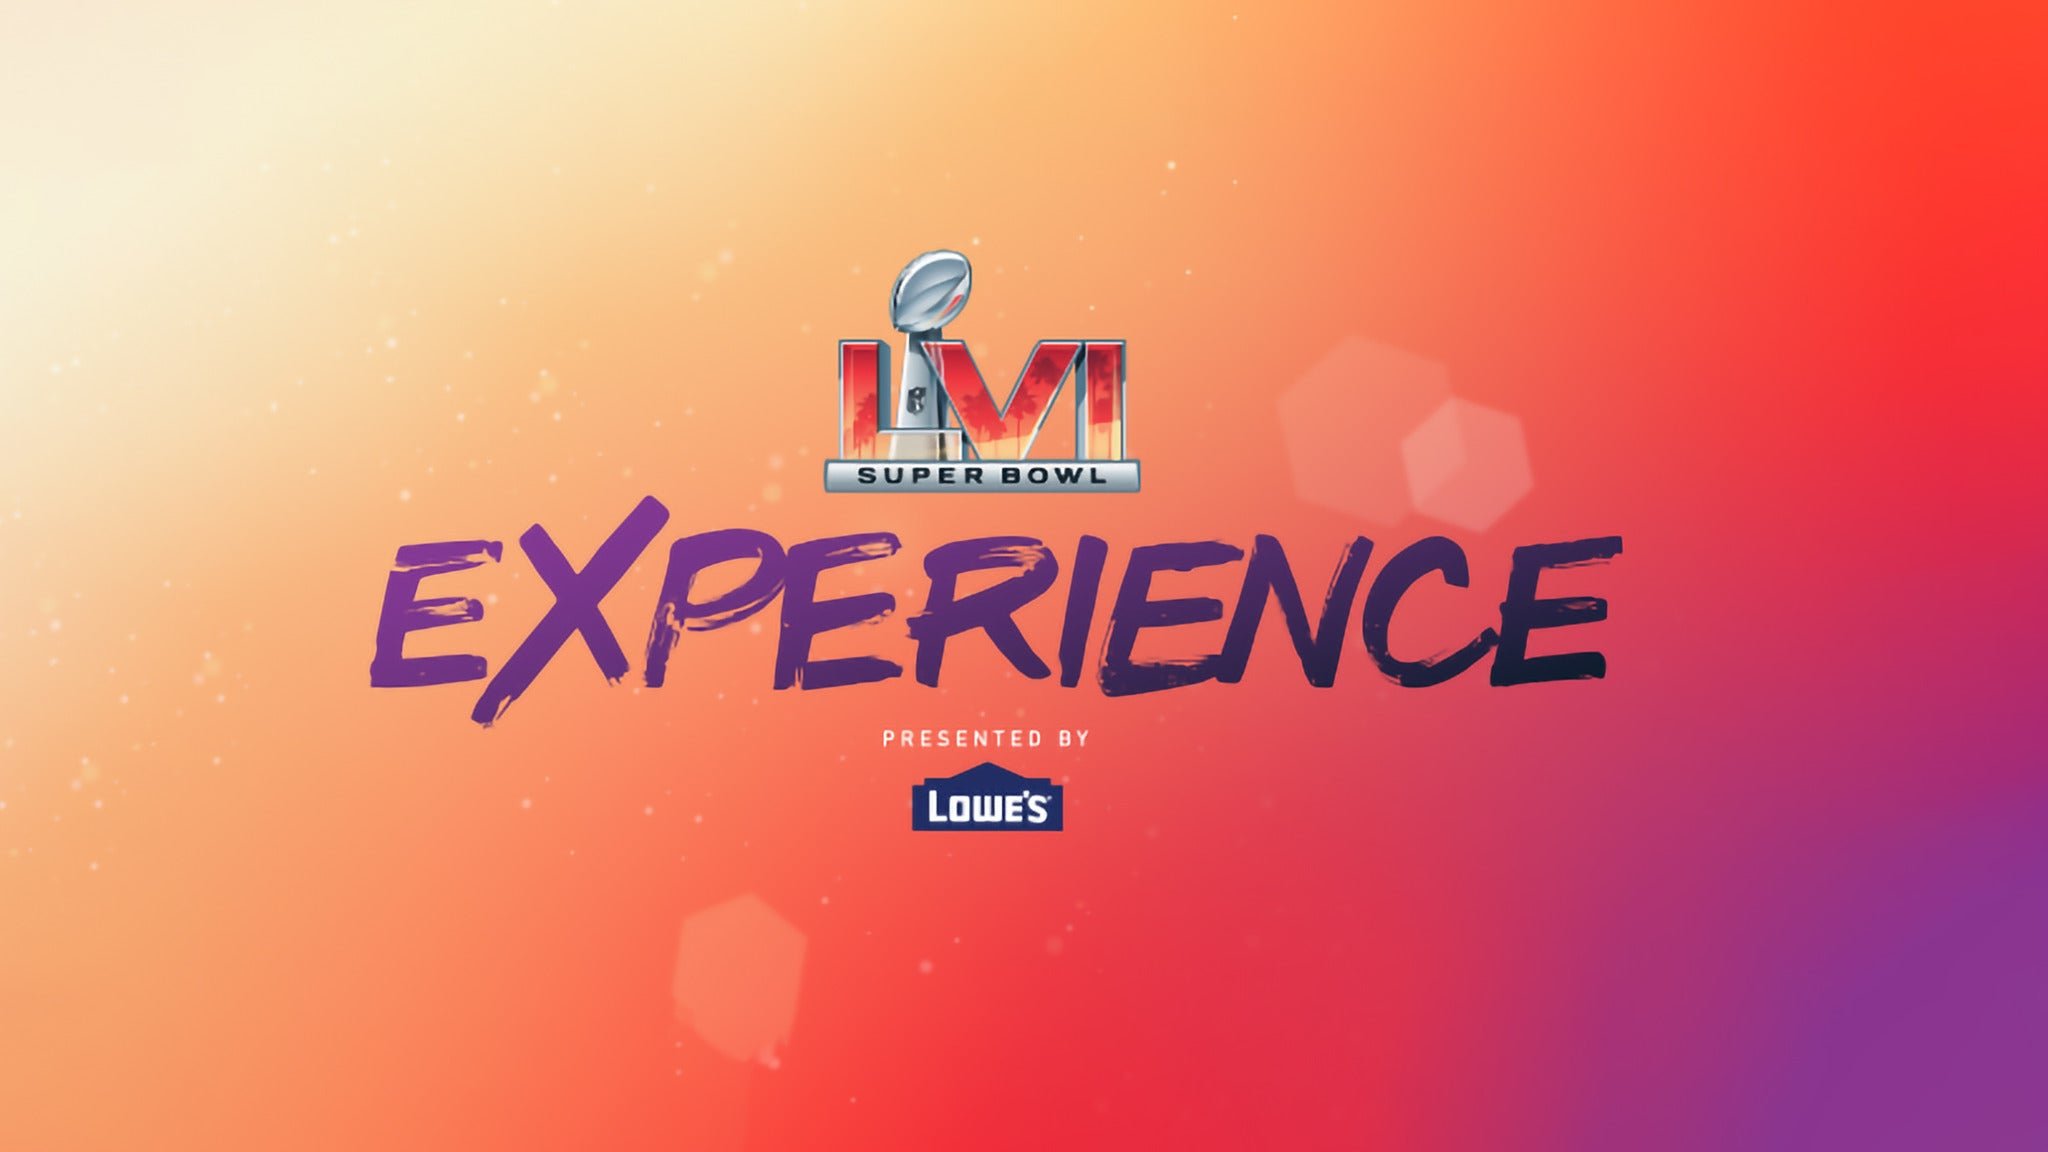 super bowl experience by lowe's